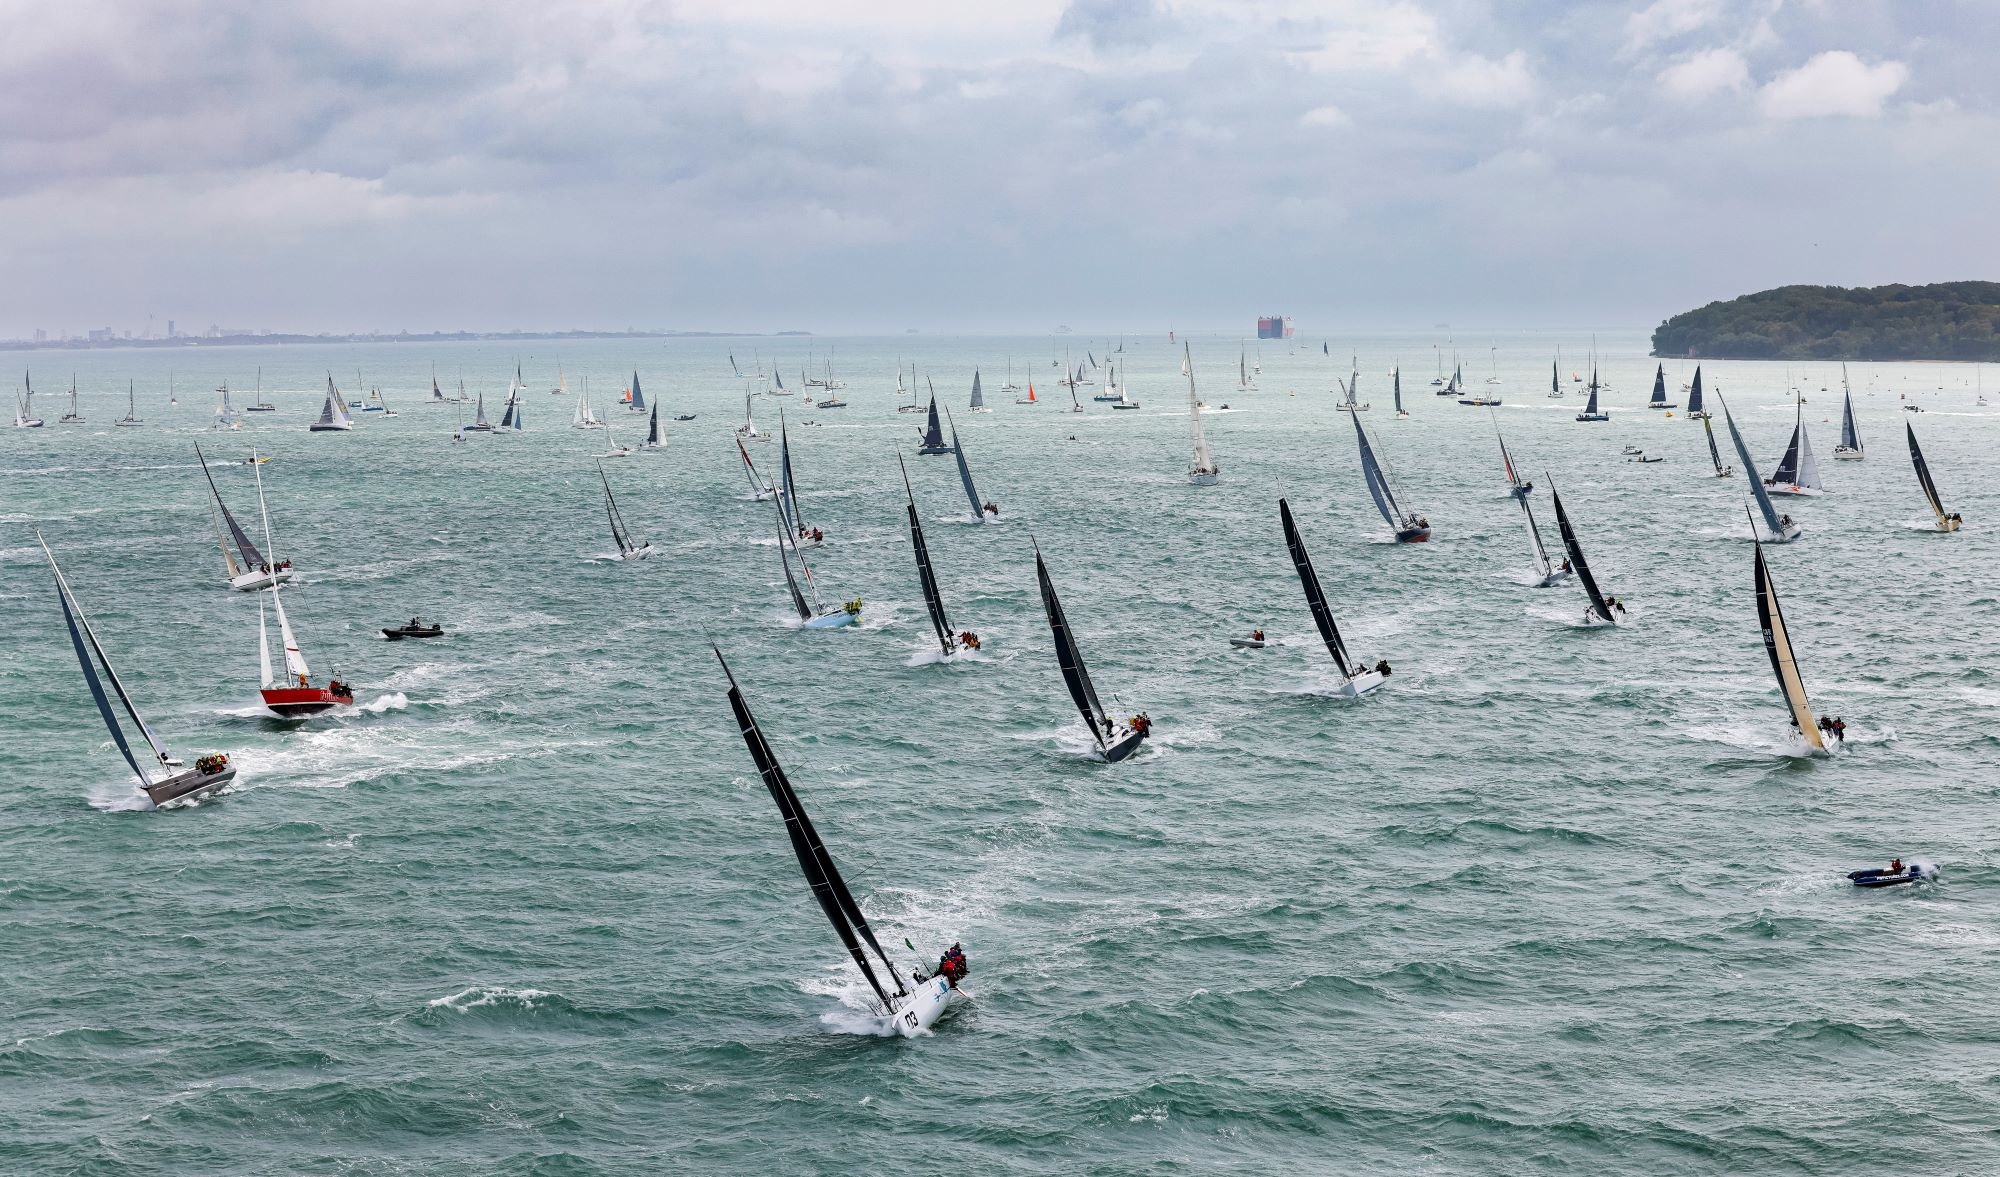  IMOCA Open 60, Class 40, IRC  Fastnet Race 2021  Cowes GBR  Day 1